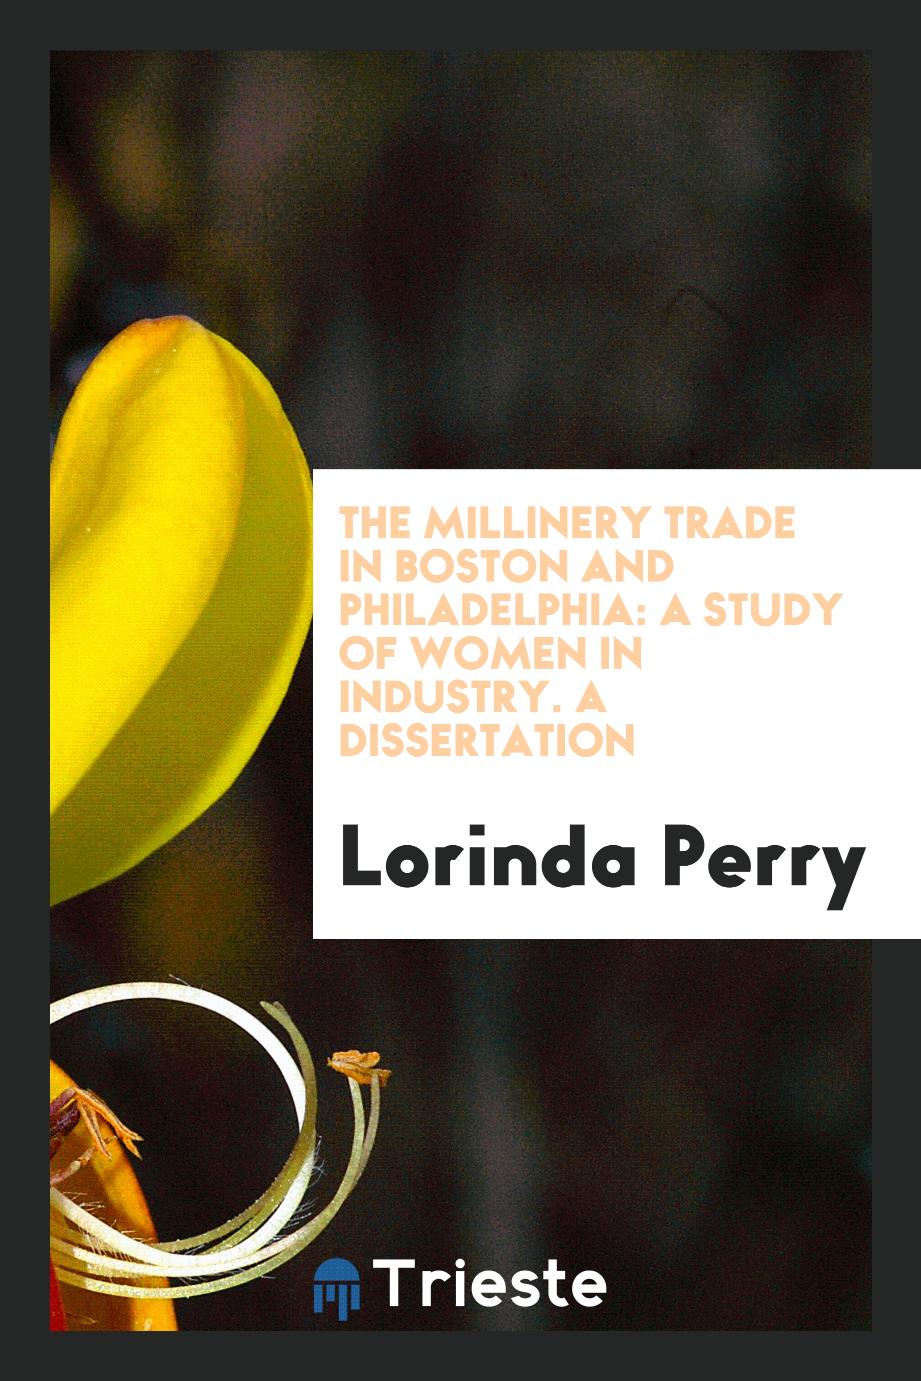 The Millinery Trade in Boston and Philadelphia: A Study of Women in Industry. A Dissertation